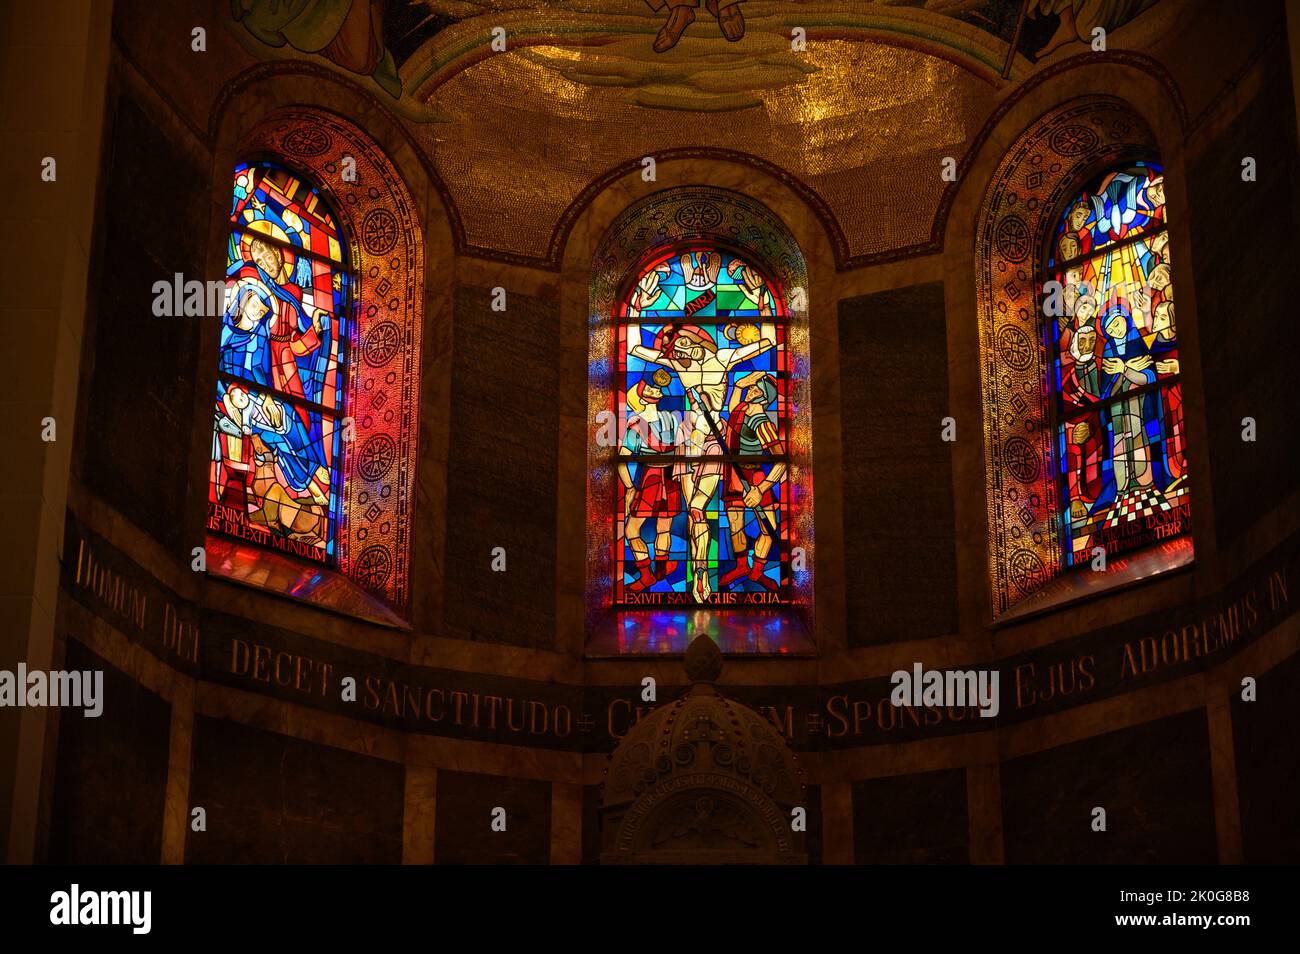 Stained-glass windows in the chancel of the Church of Saints Cosmas & Damian in Clervaux, Luxembourg. Stock Photo